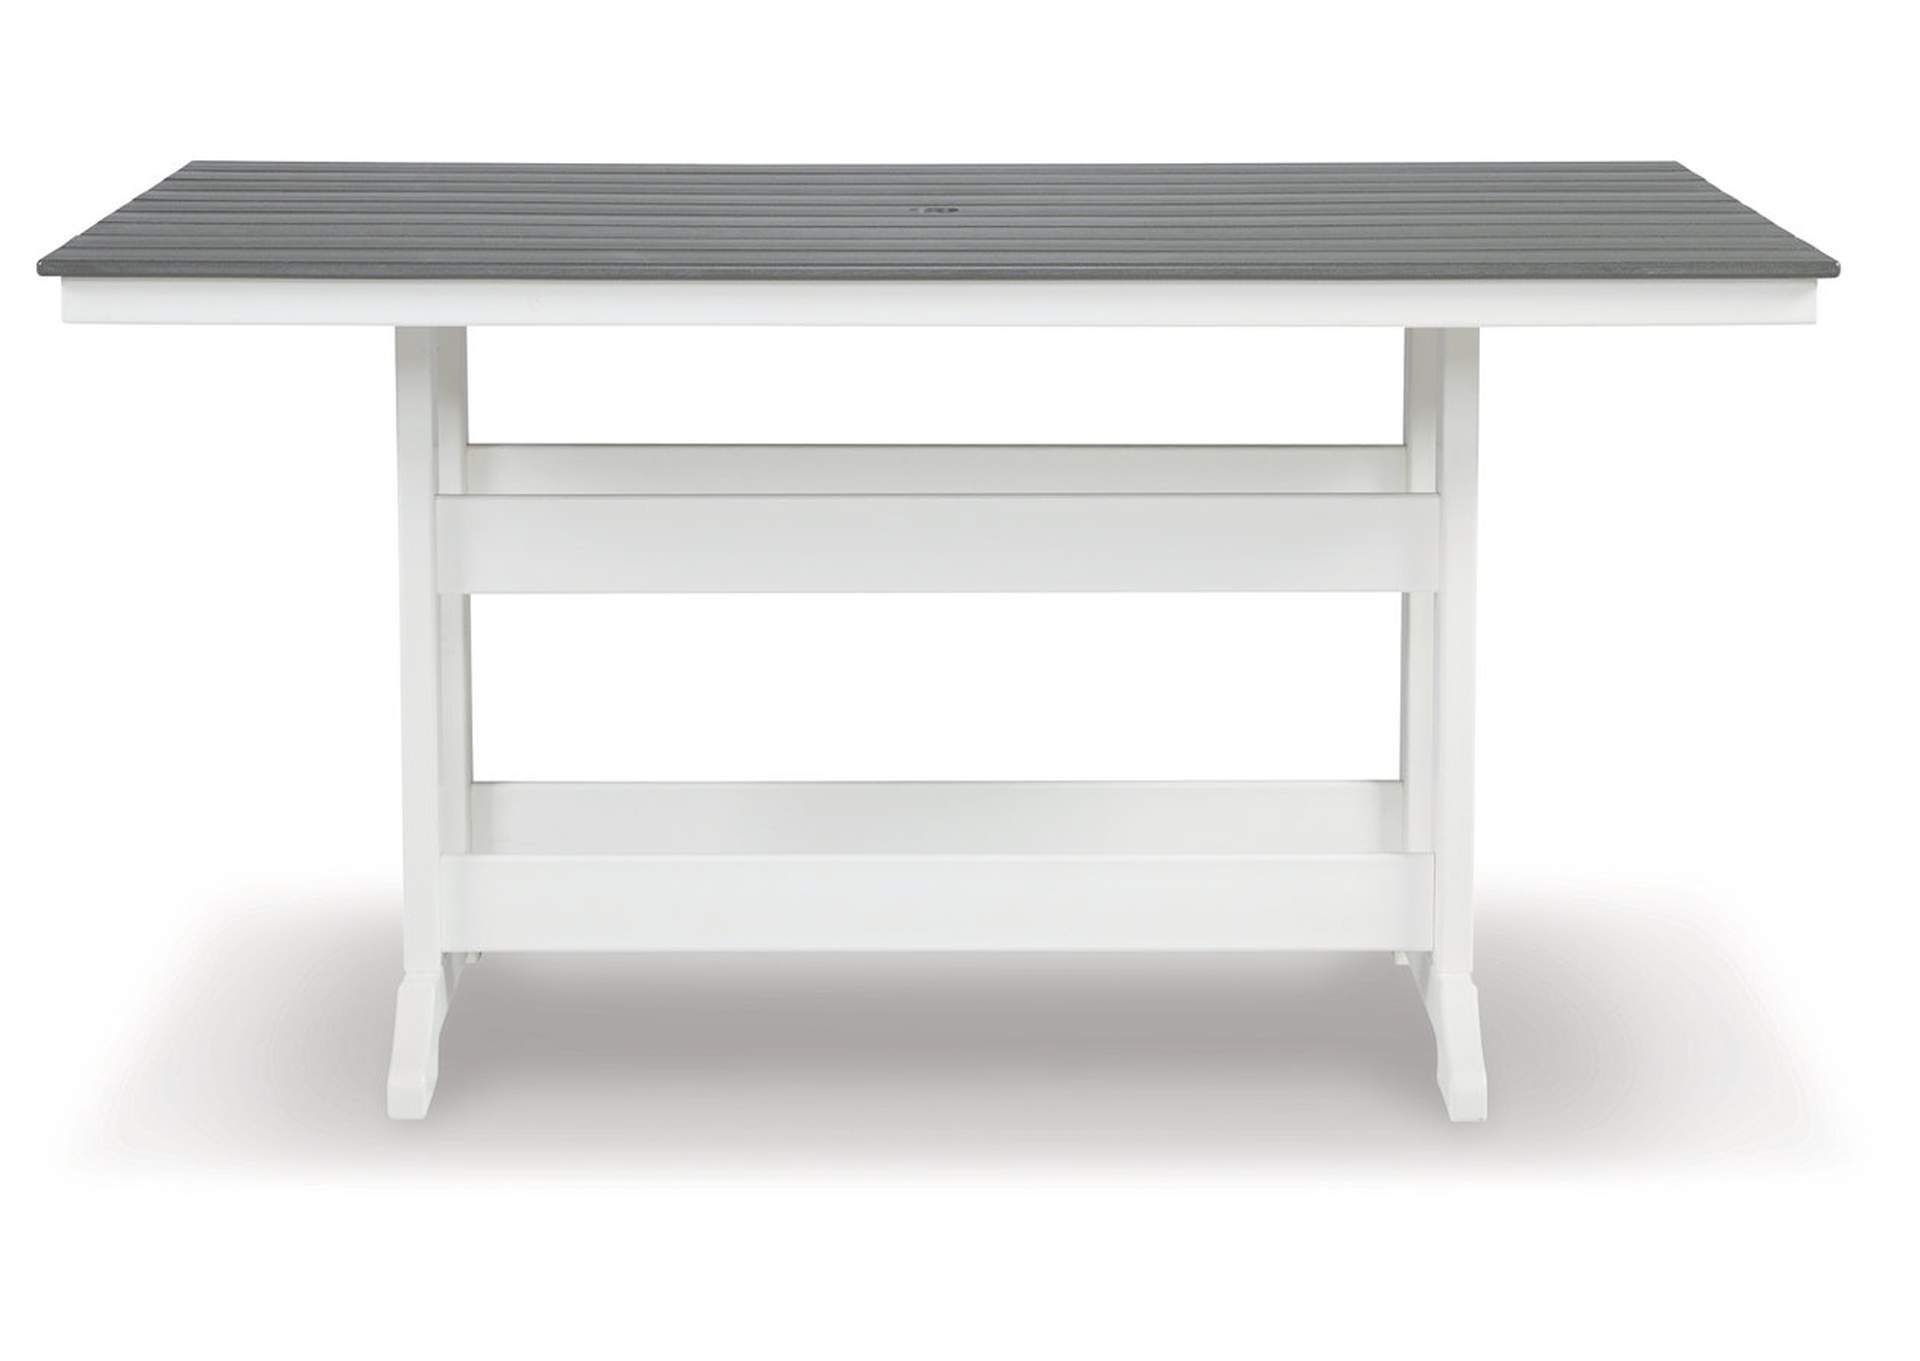 Transville Outdoor Counter Height Dining Table,Outdoor By Ashley